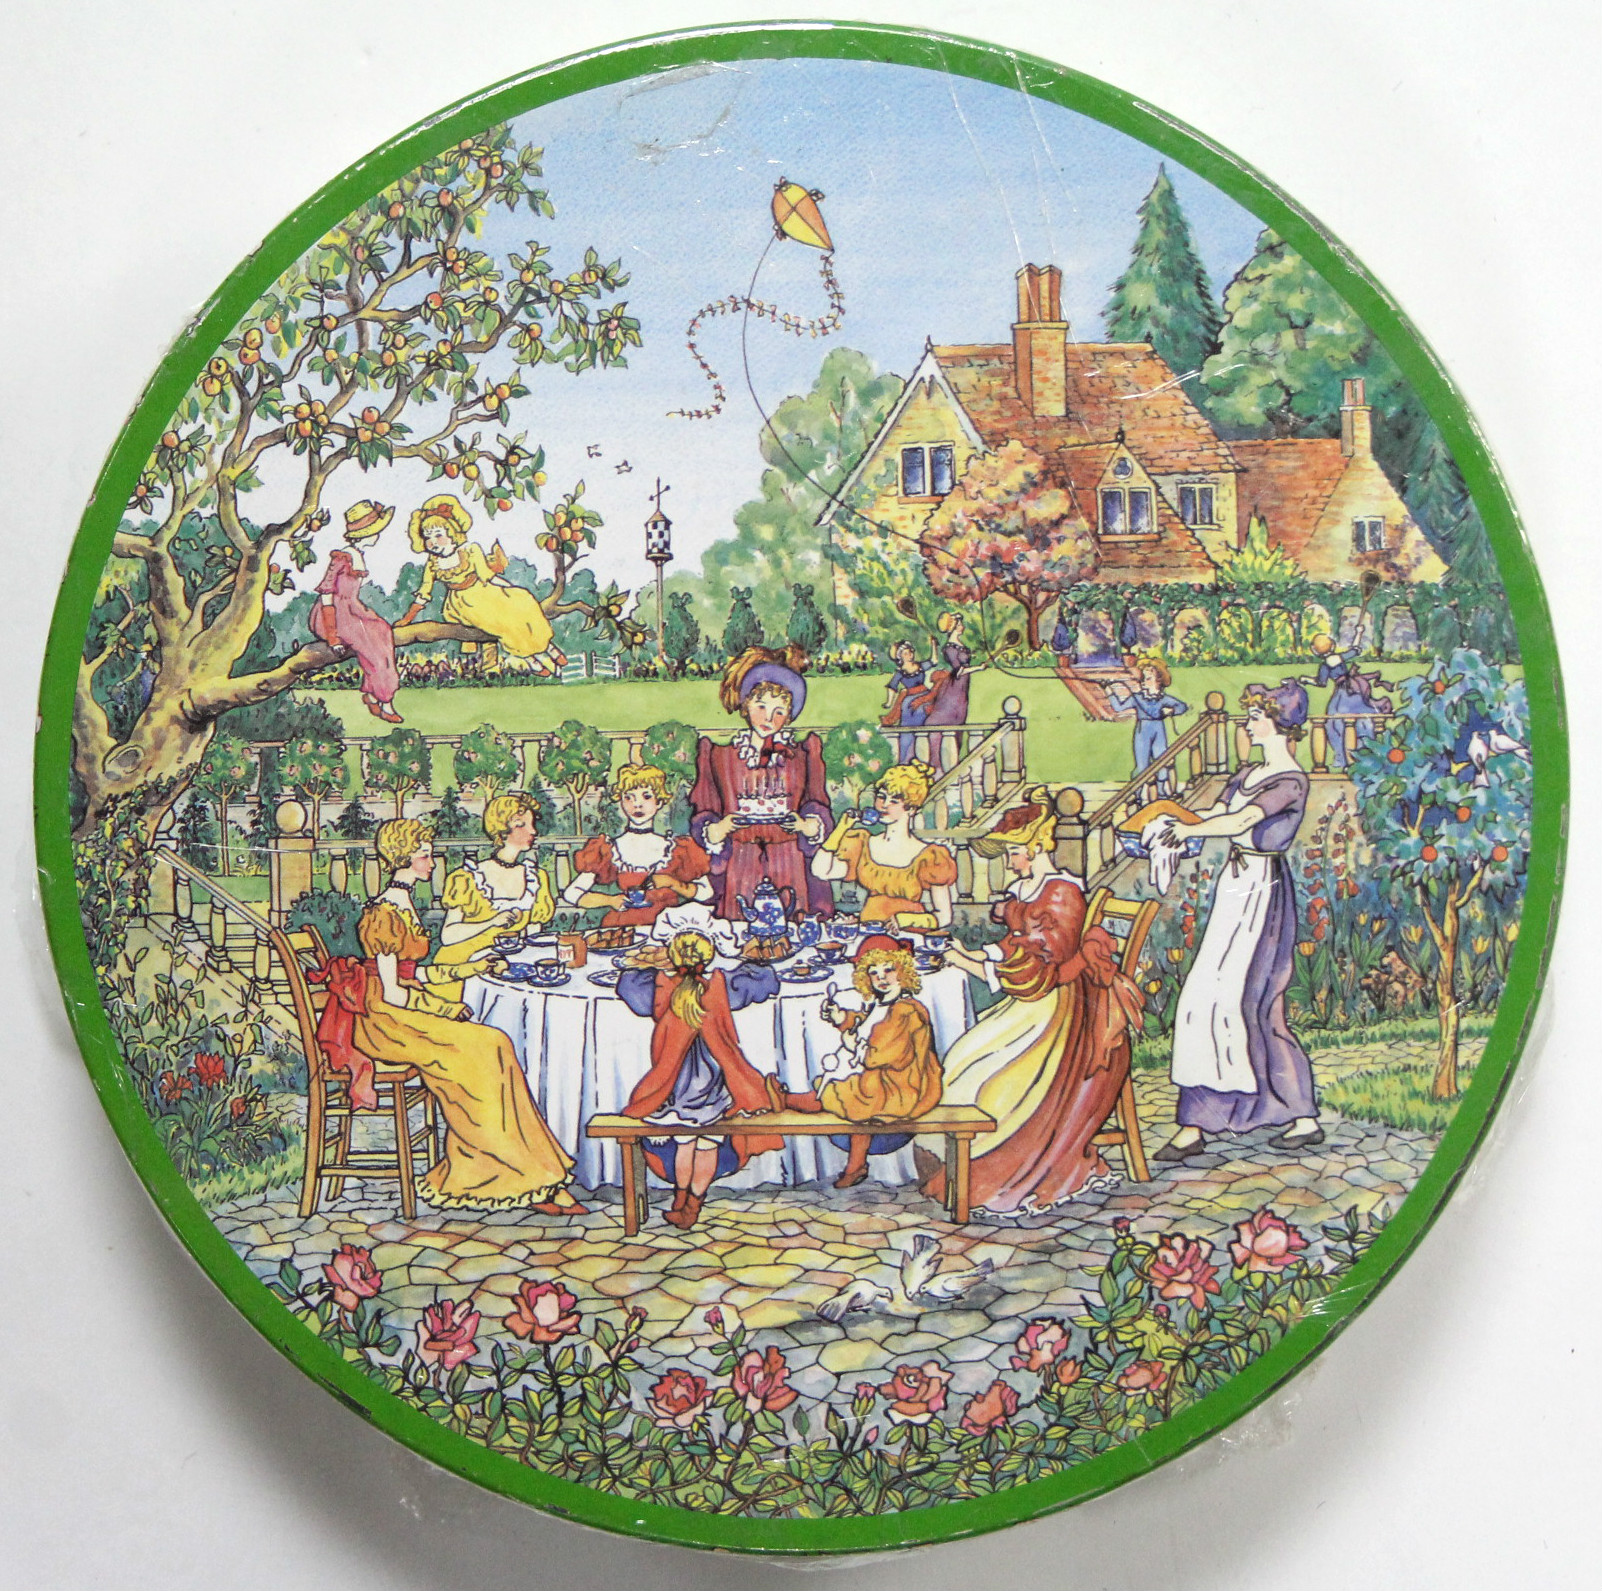 A HUNTLEY & PALMERS “NAUGHTY” BISCUIT TIN, COMPLETE WITH ORIGINAL CONTENTS, the circular tin